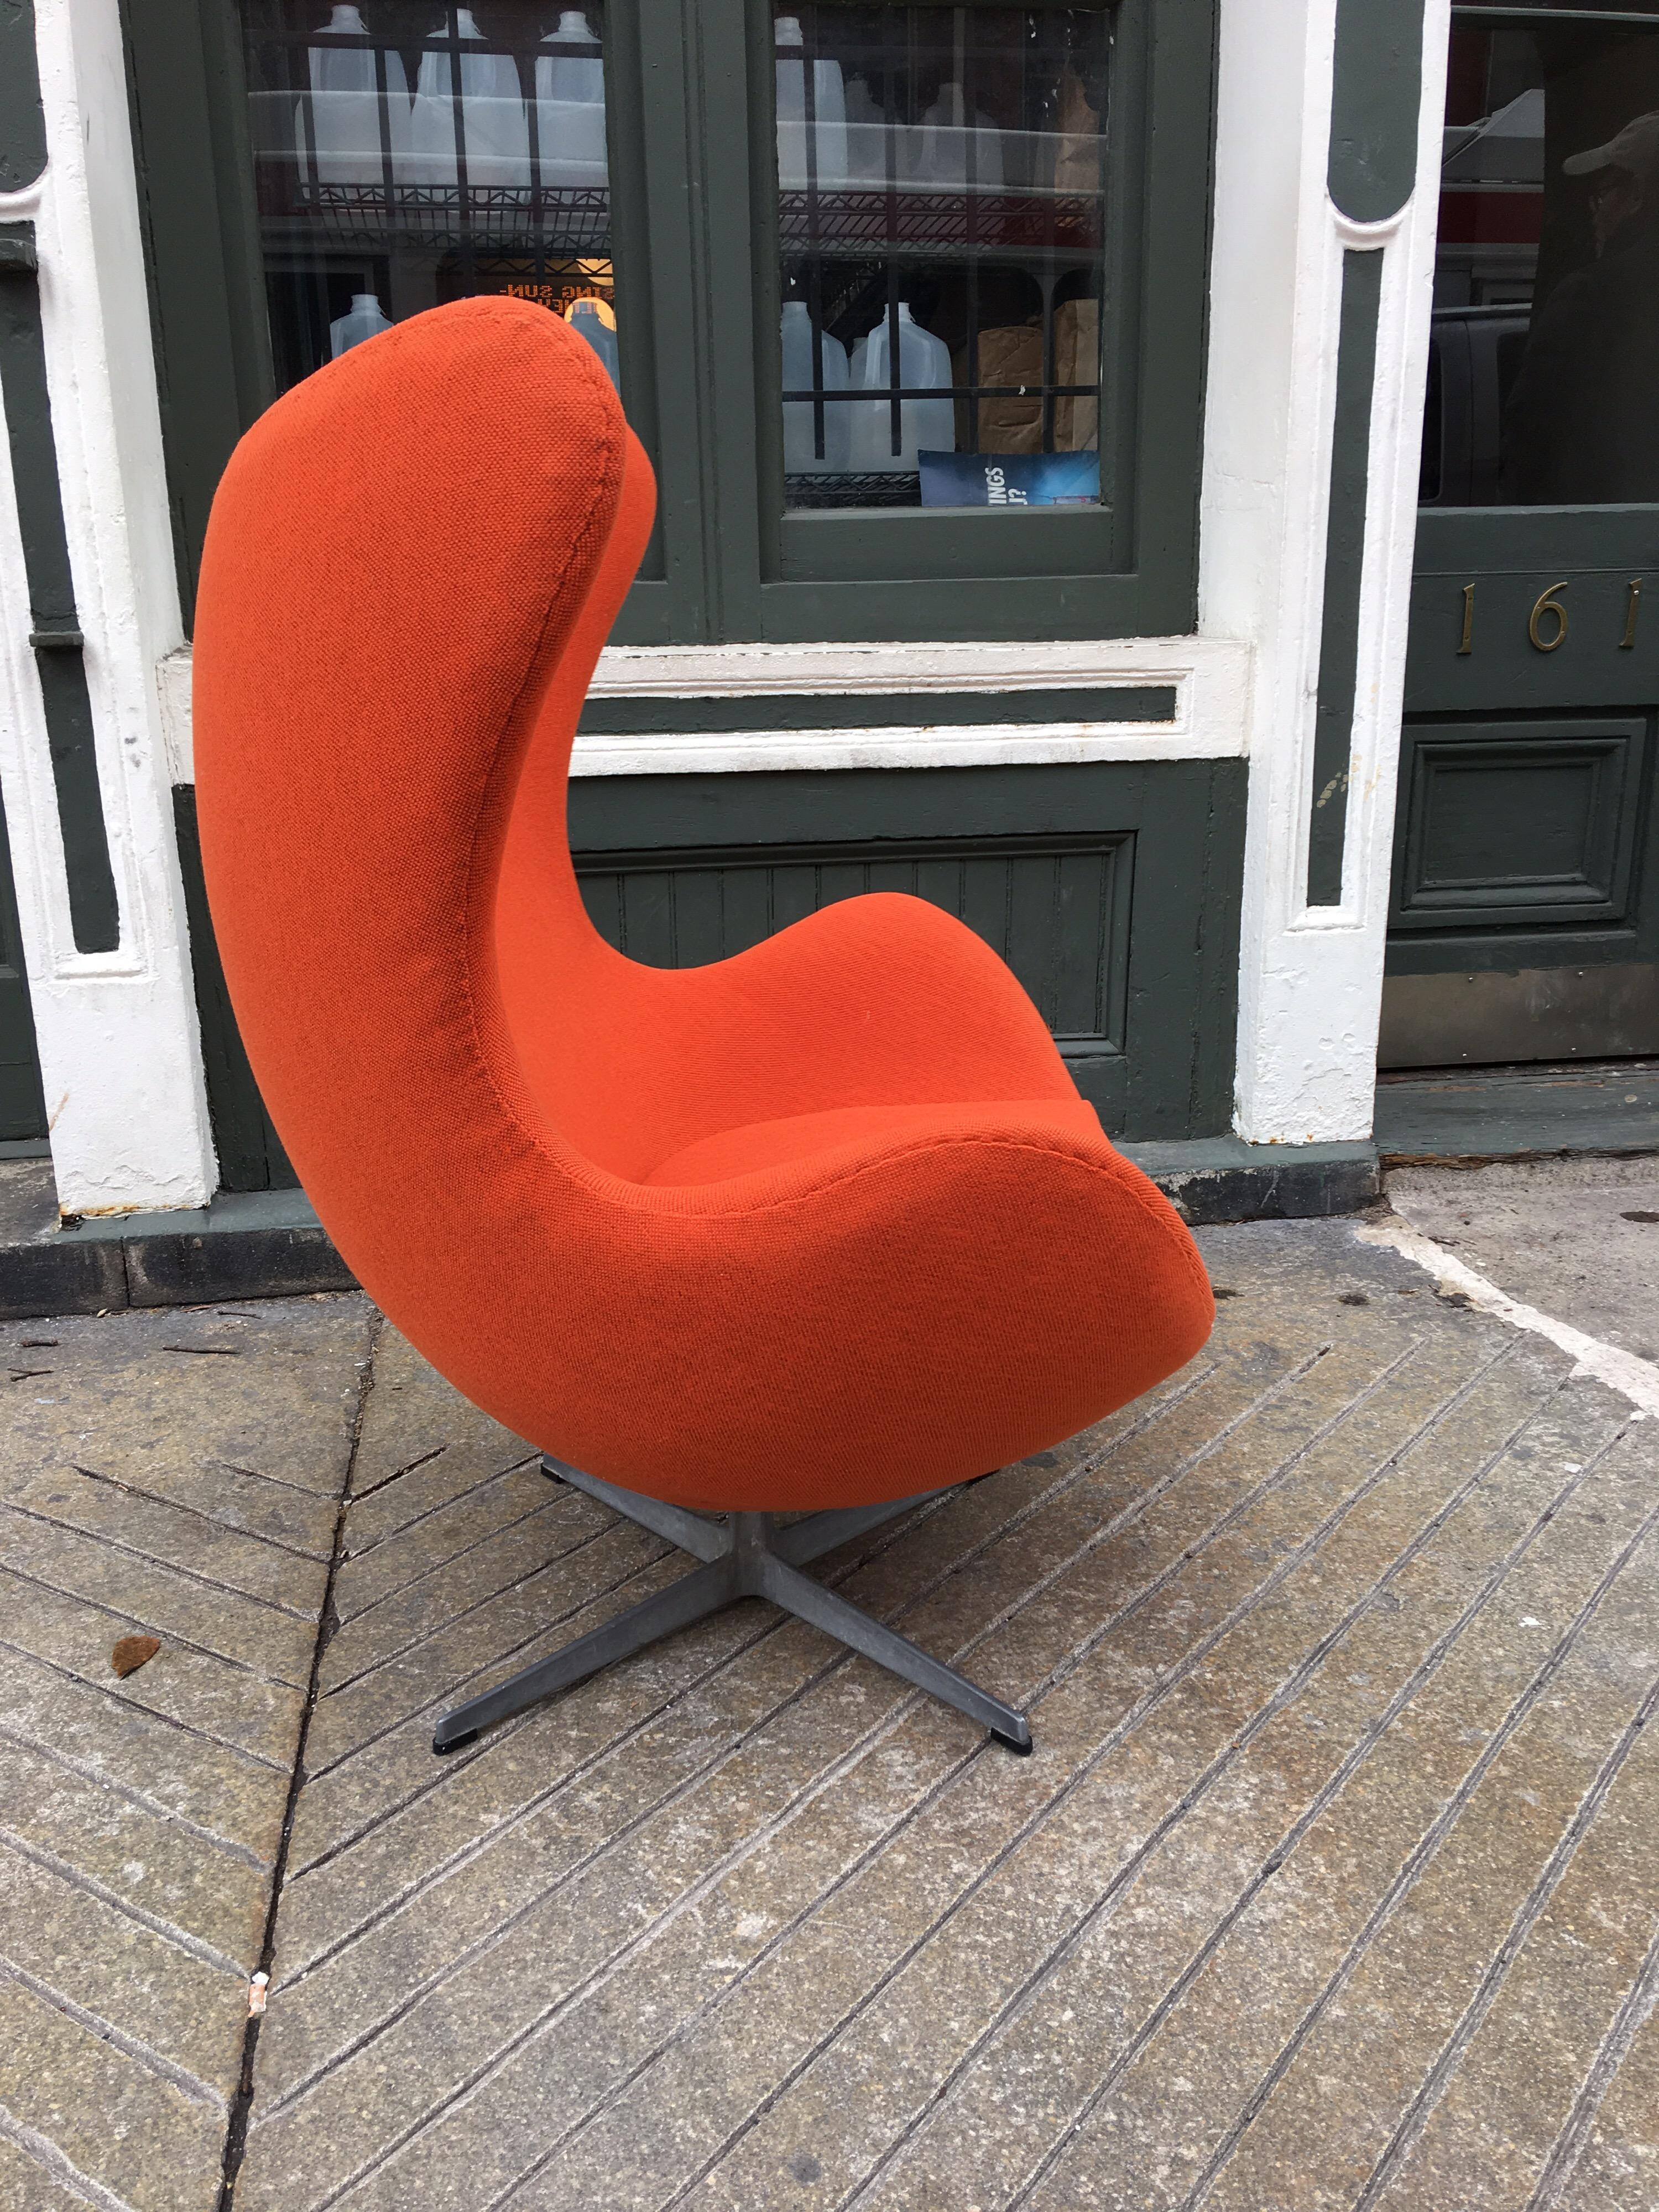 Newly reupholstered Egg chair by Arne Jacobsen for Fritz Hansen. This is an older model with the stem made up of concave sides instead of the simple newer model of a round stem. This chair also has the reclining mechanism which is always an added